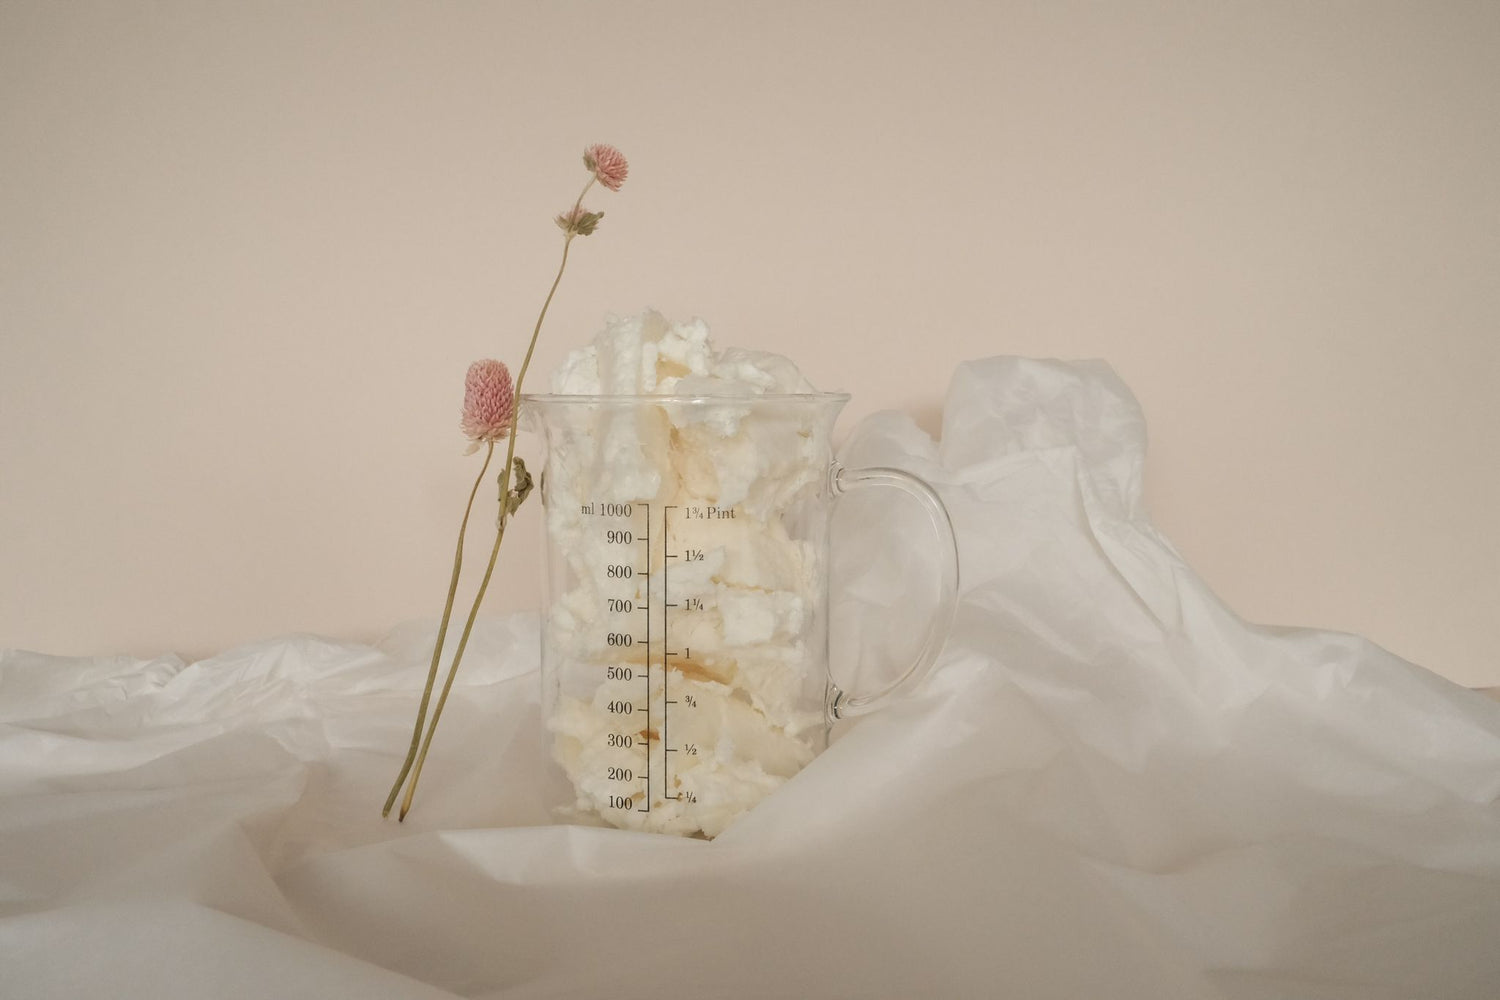 A glass beaker of Shea Butter with a pink flower leaning on it, set on a ruffled white sheet and a light peach coloured background.